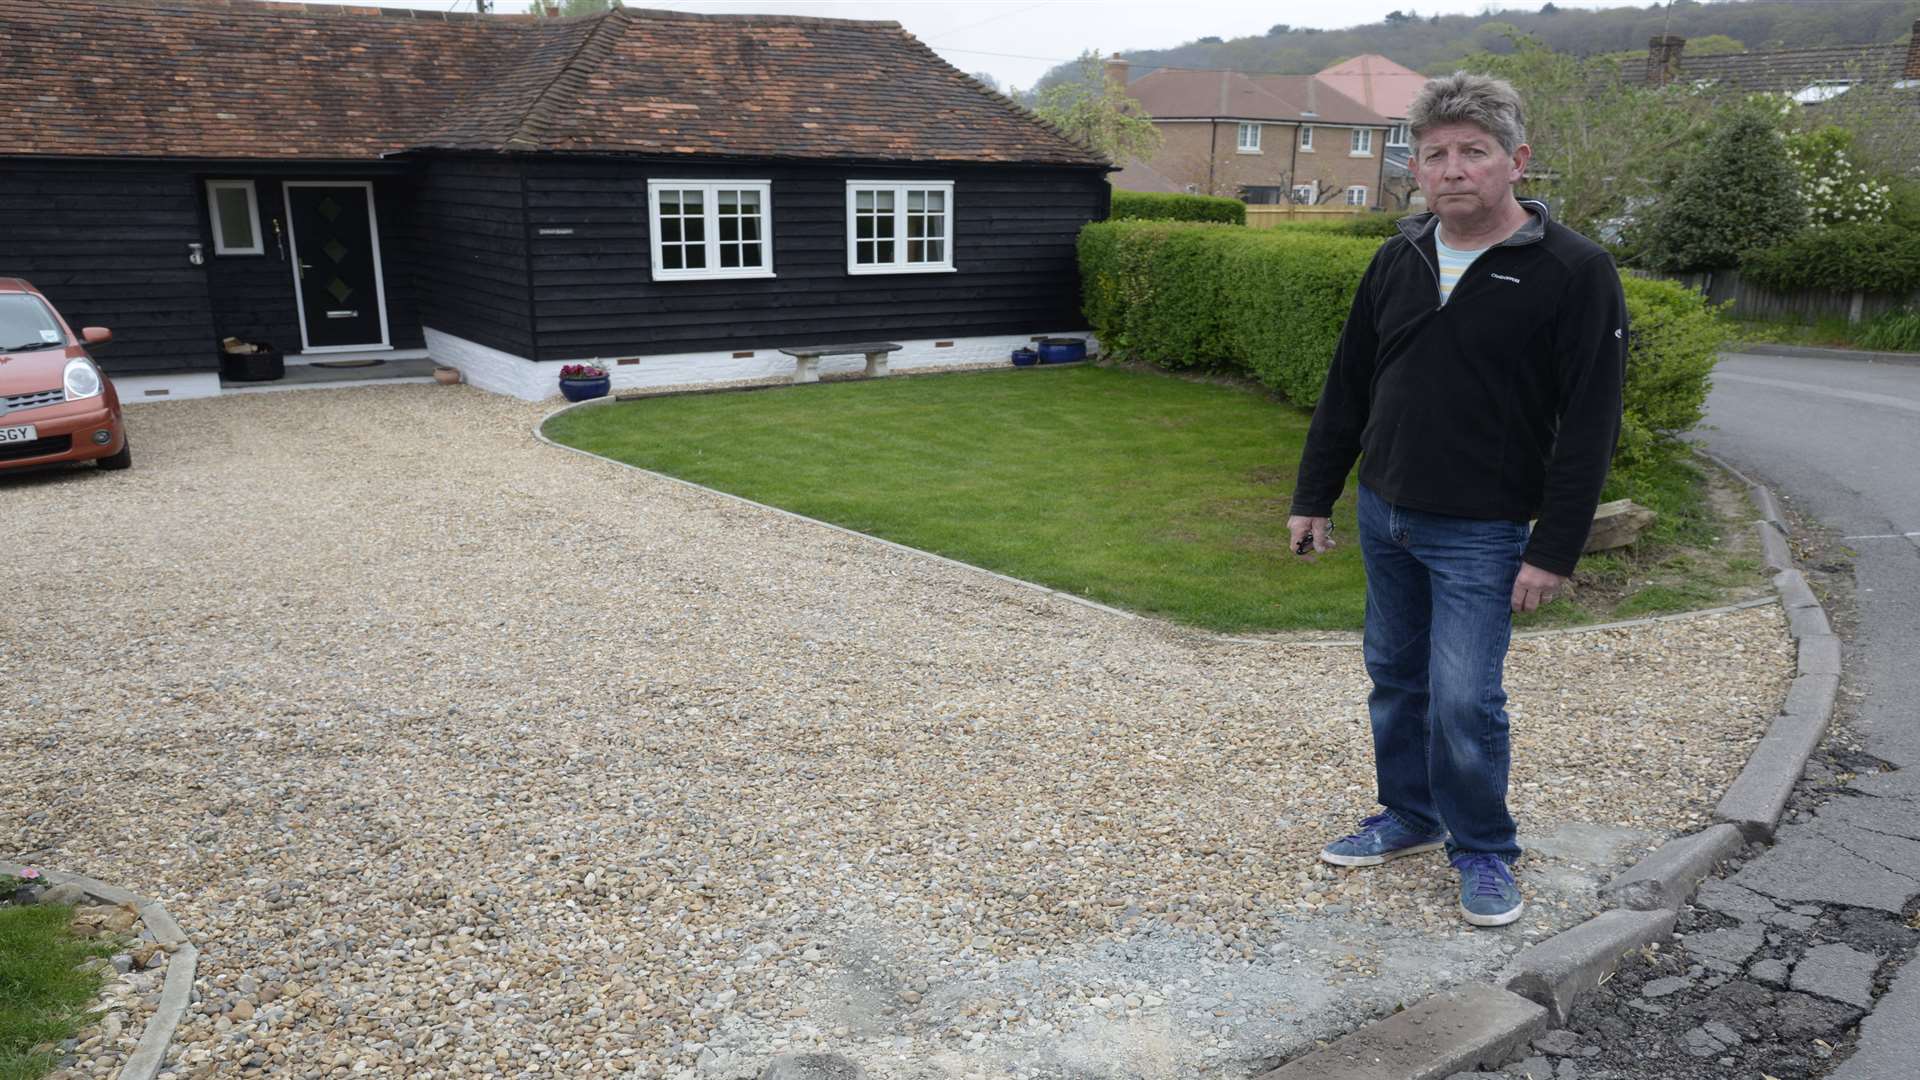 Antony Ives spent thousands on his dream home - but now faces lorry hell.